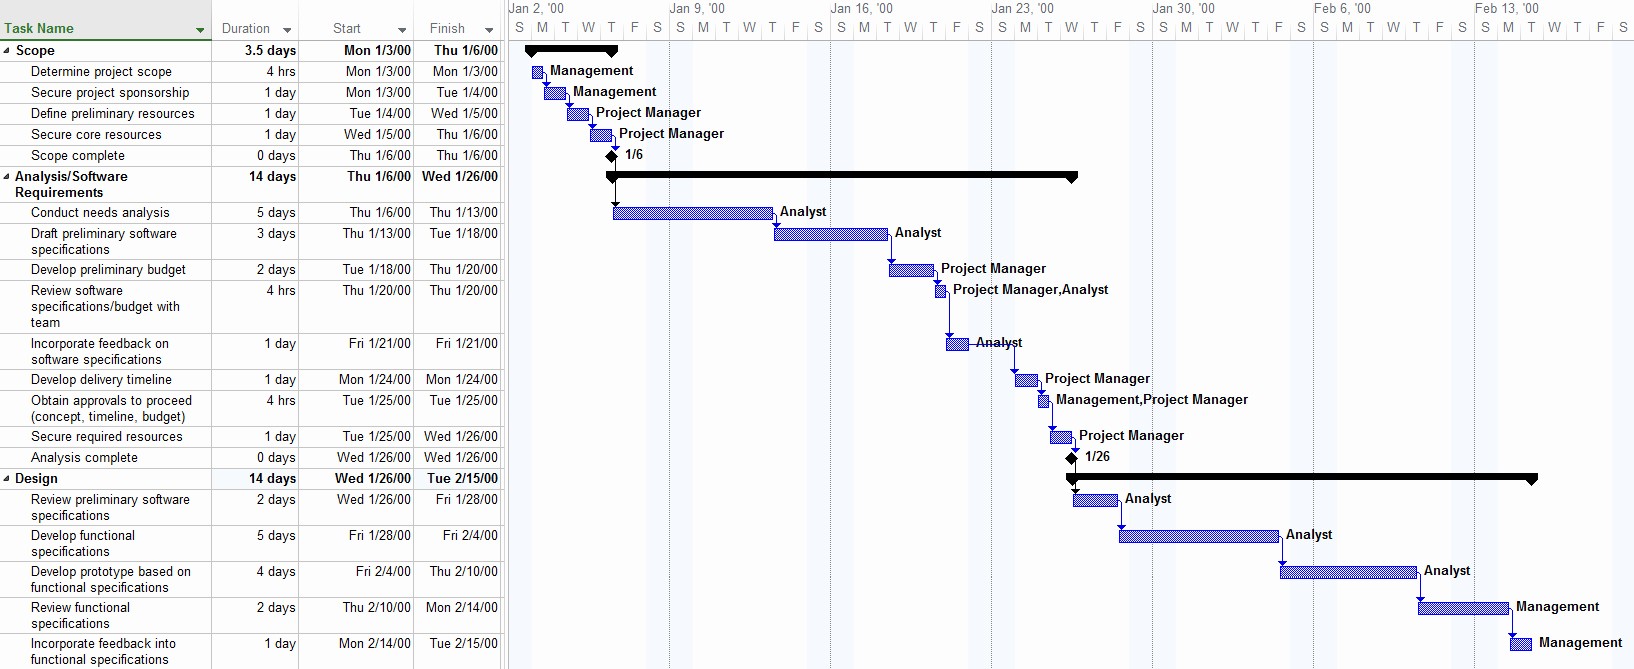 Monthly Project Timeline Template Excel Unique Monthly Project Timeline Template Excel Timeline